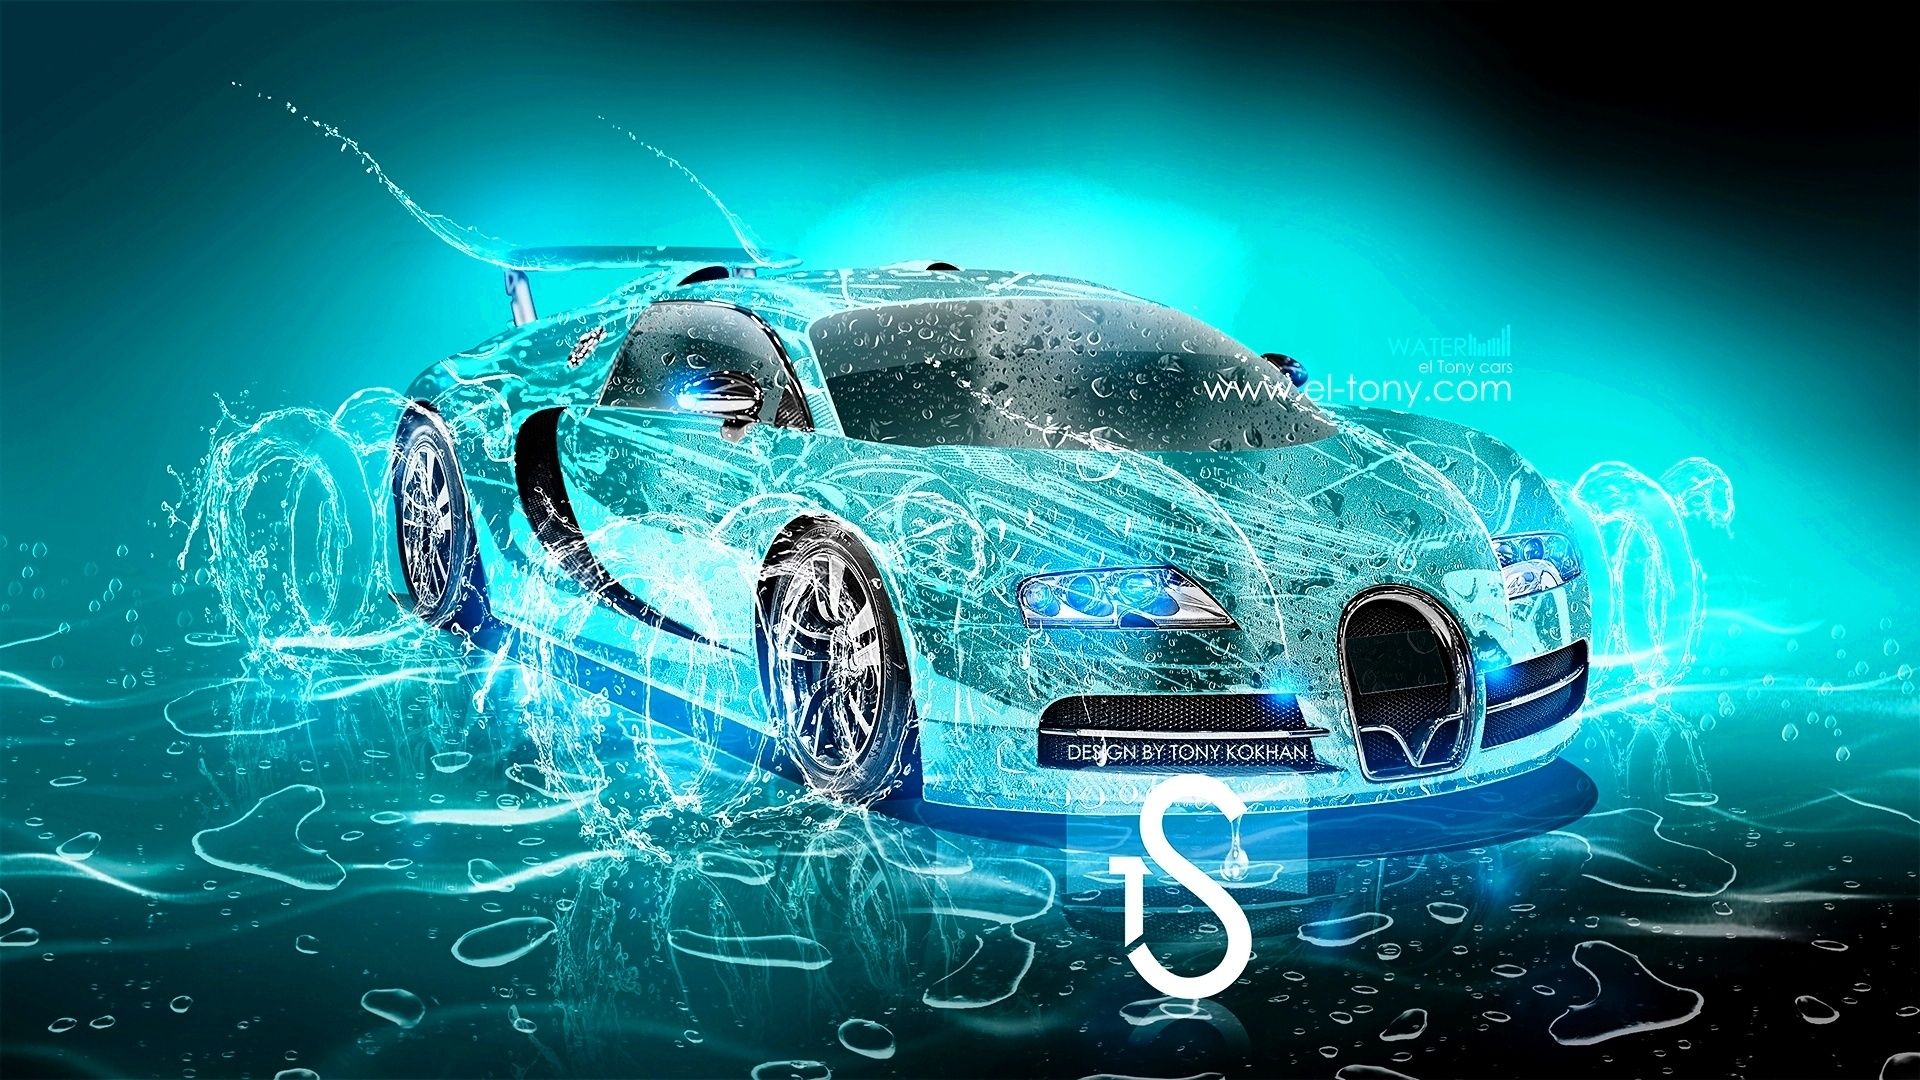 Design Talent Showcase Tony.com Brings Sensual Elements Fire And Water To YOUR Car Wallpaper 5